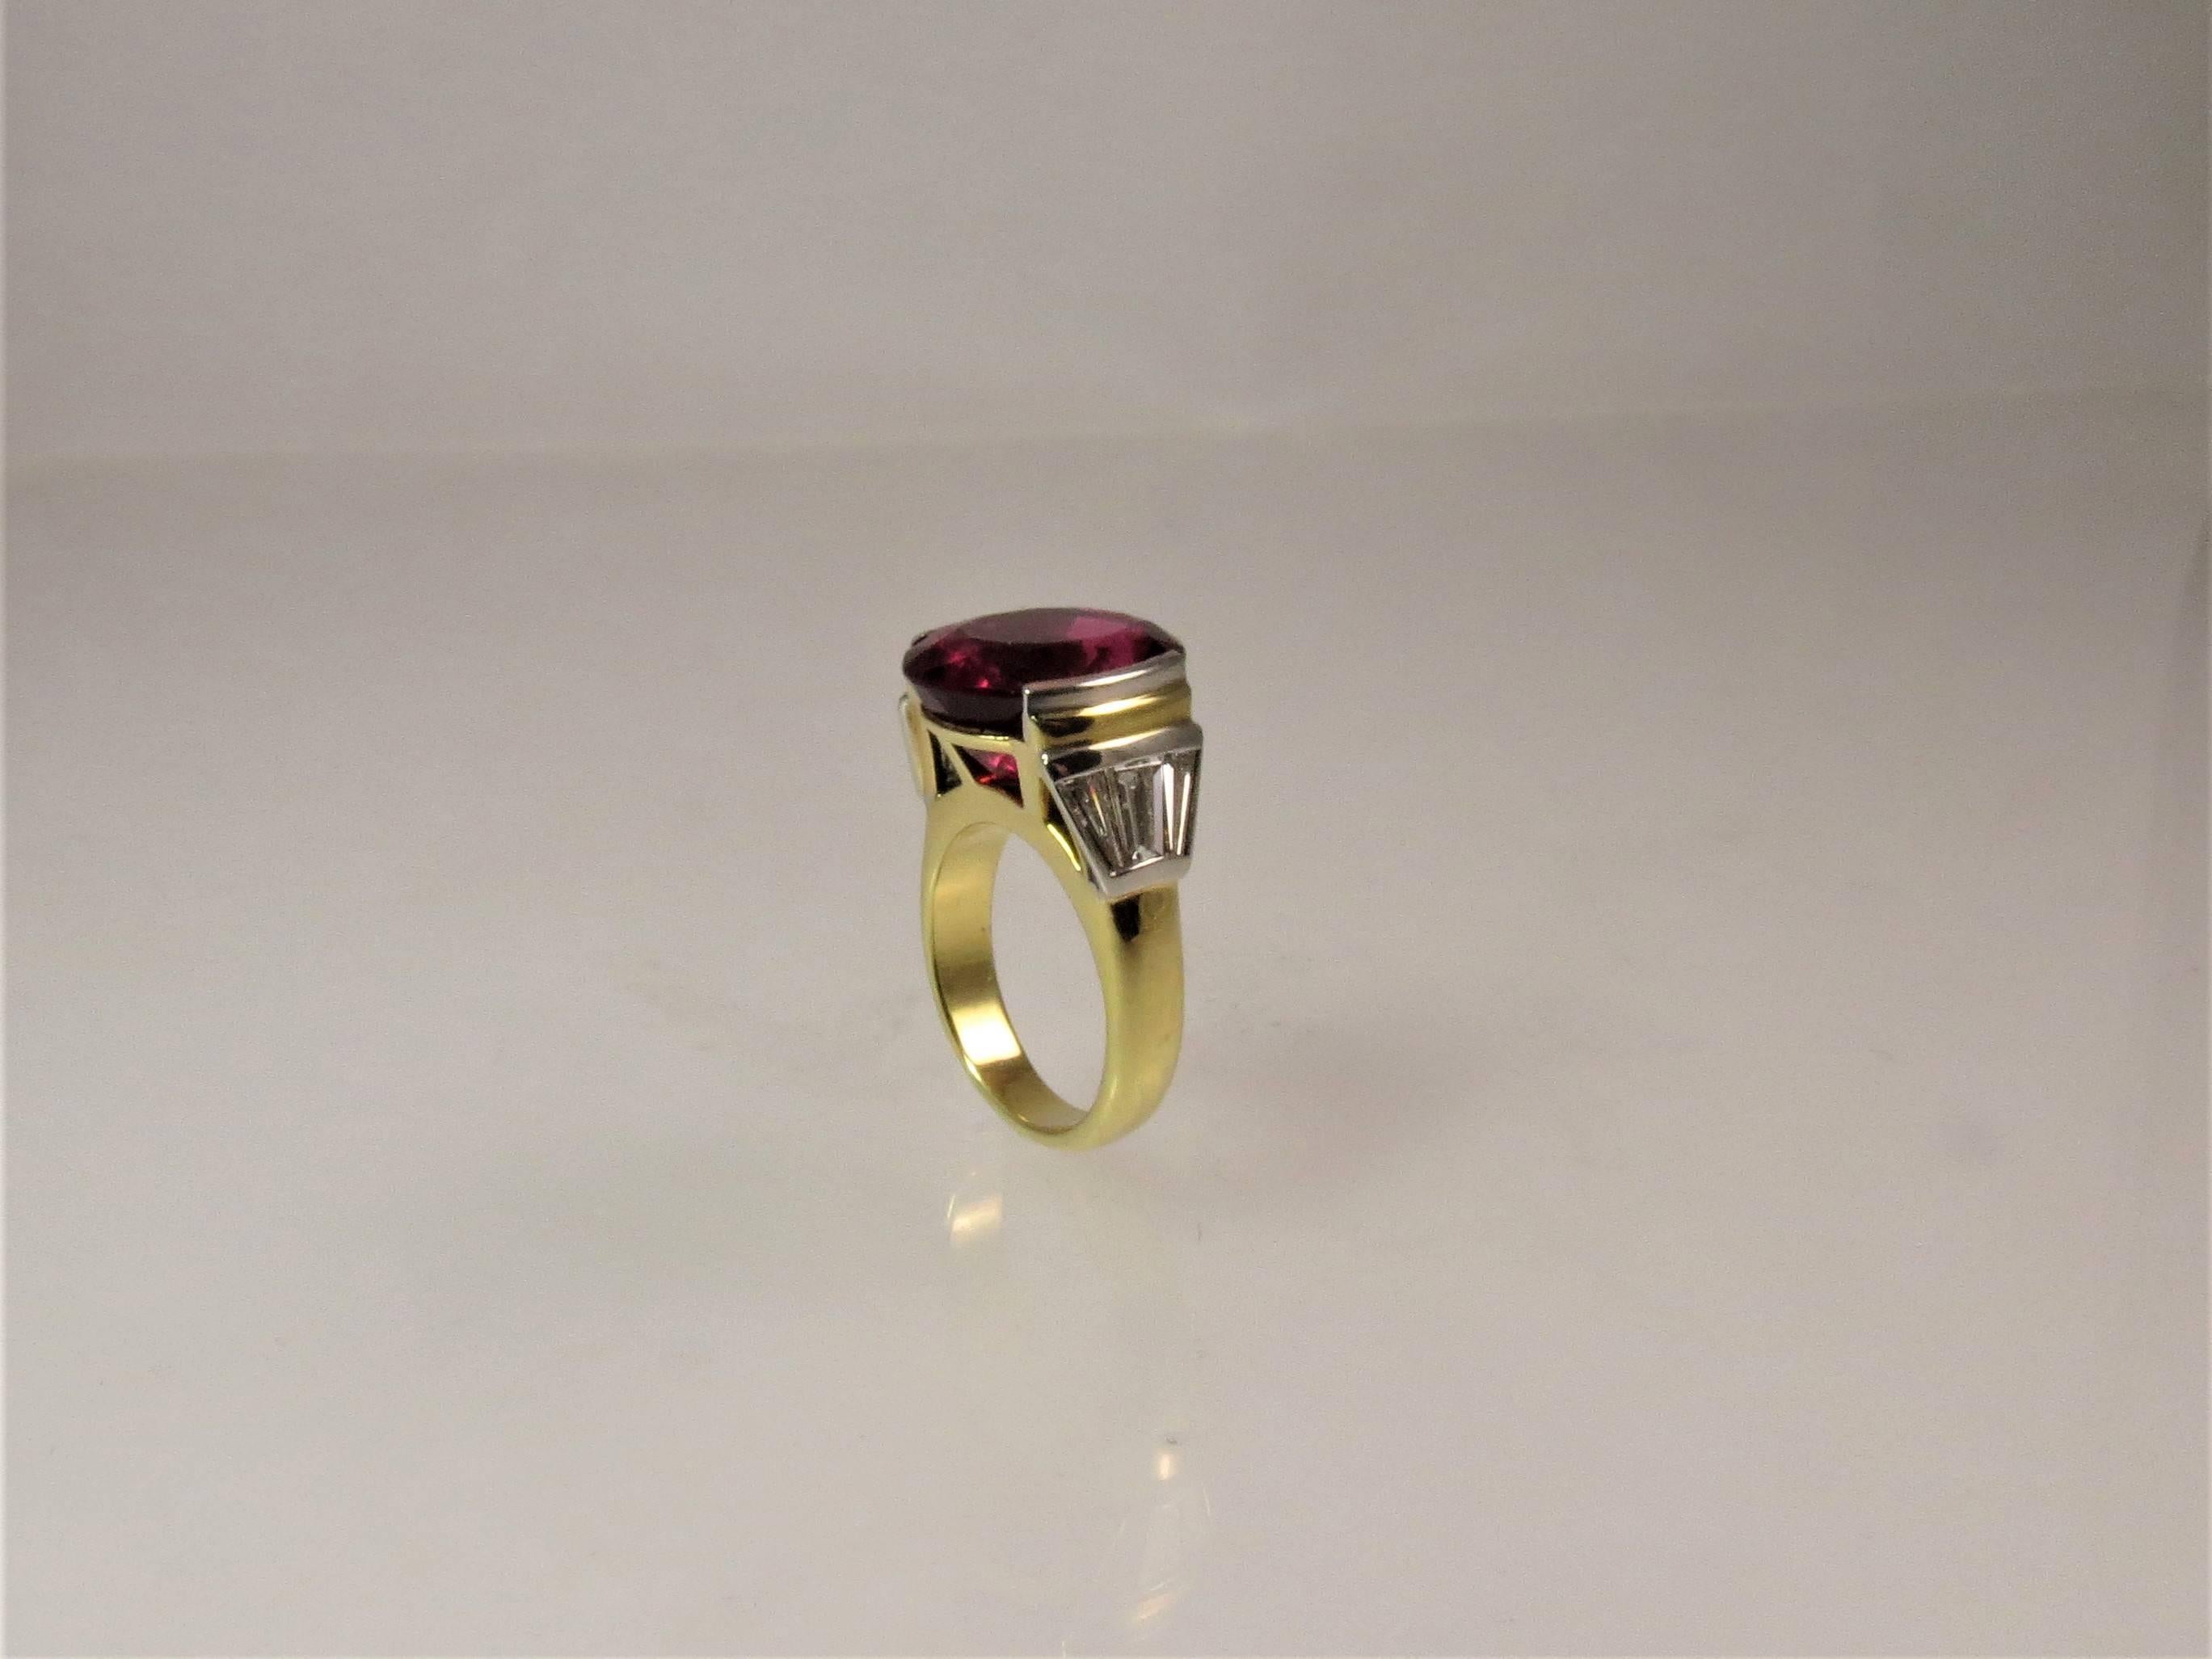 Susan Berman, 18K yellow gold and platinum ring set in center with oval 
rubellite weighing 10.38cts and flanked by 6 baguette diamonds weighing 1.30cts, G-H color, VS clarity. 
Finger size 6, may be sized